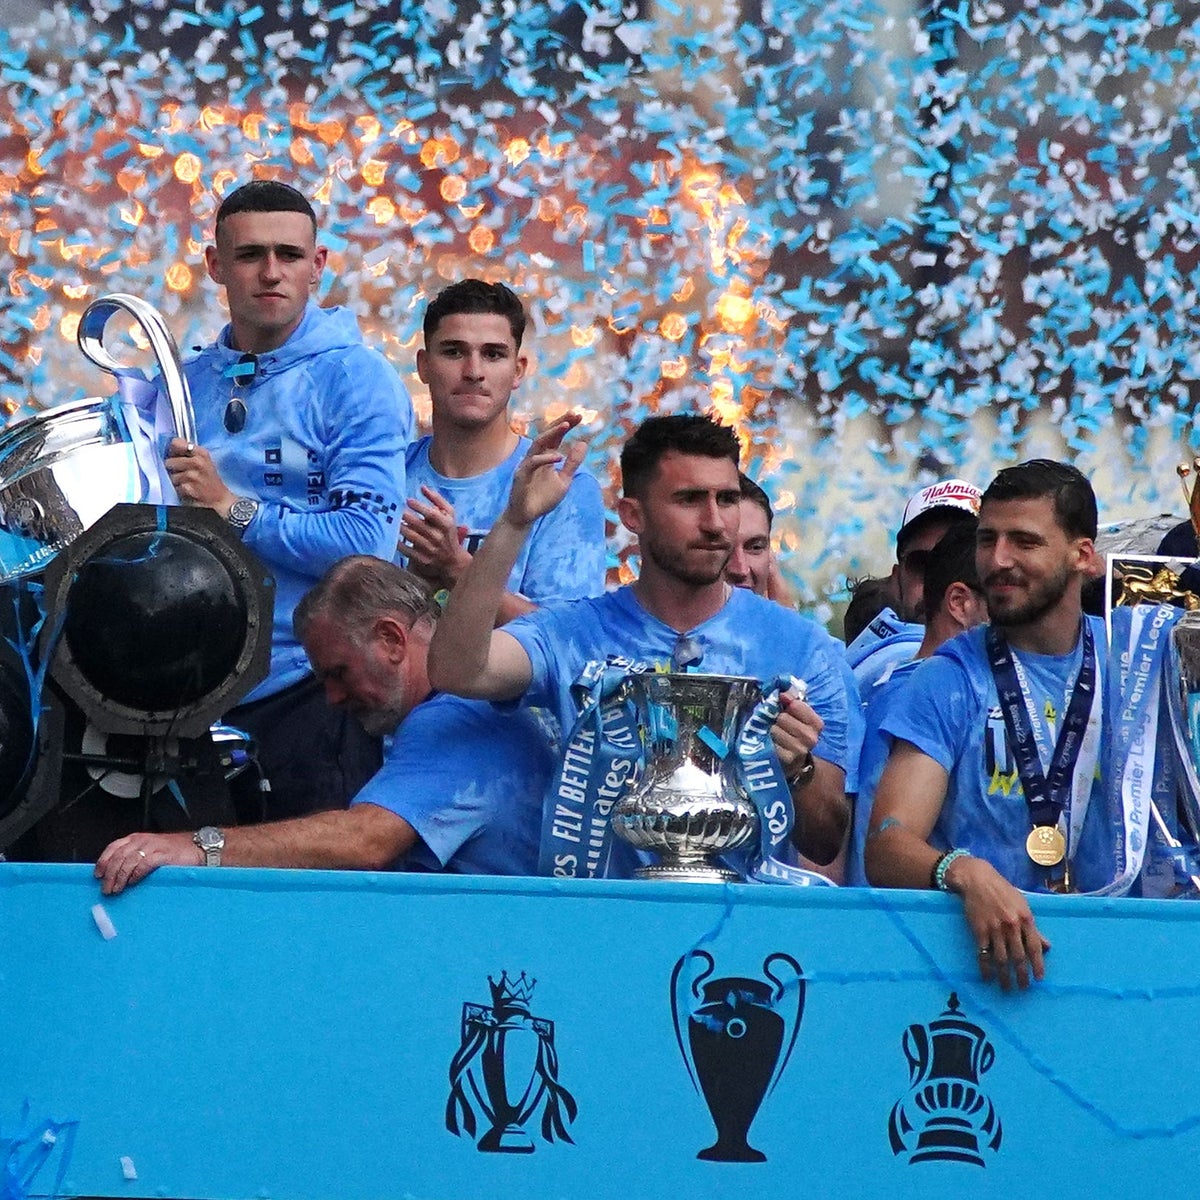 Manchester City's trophy parade in picture